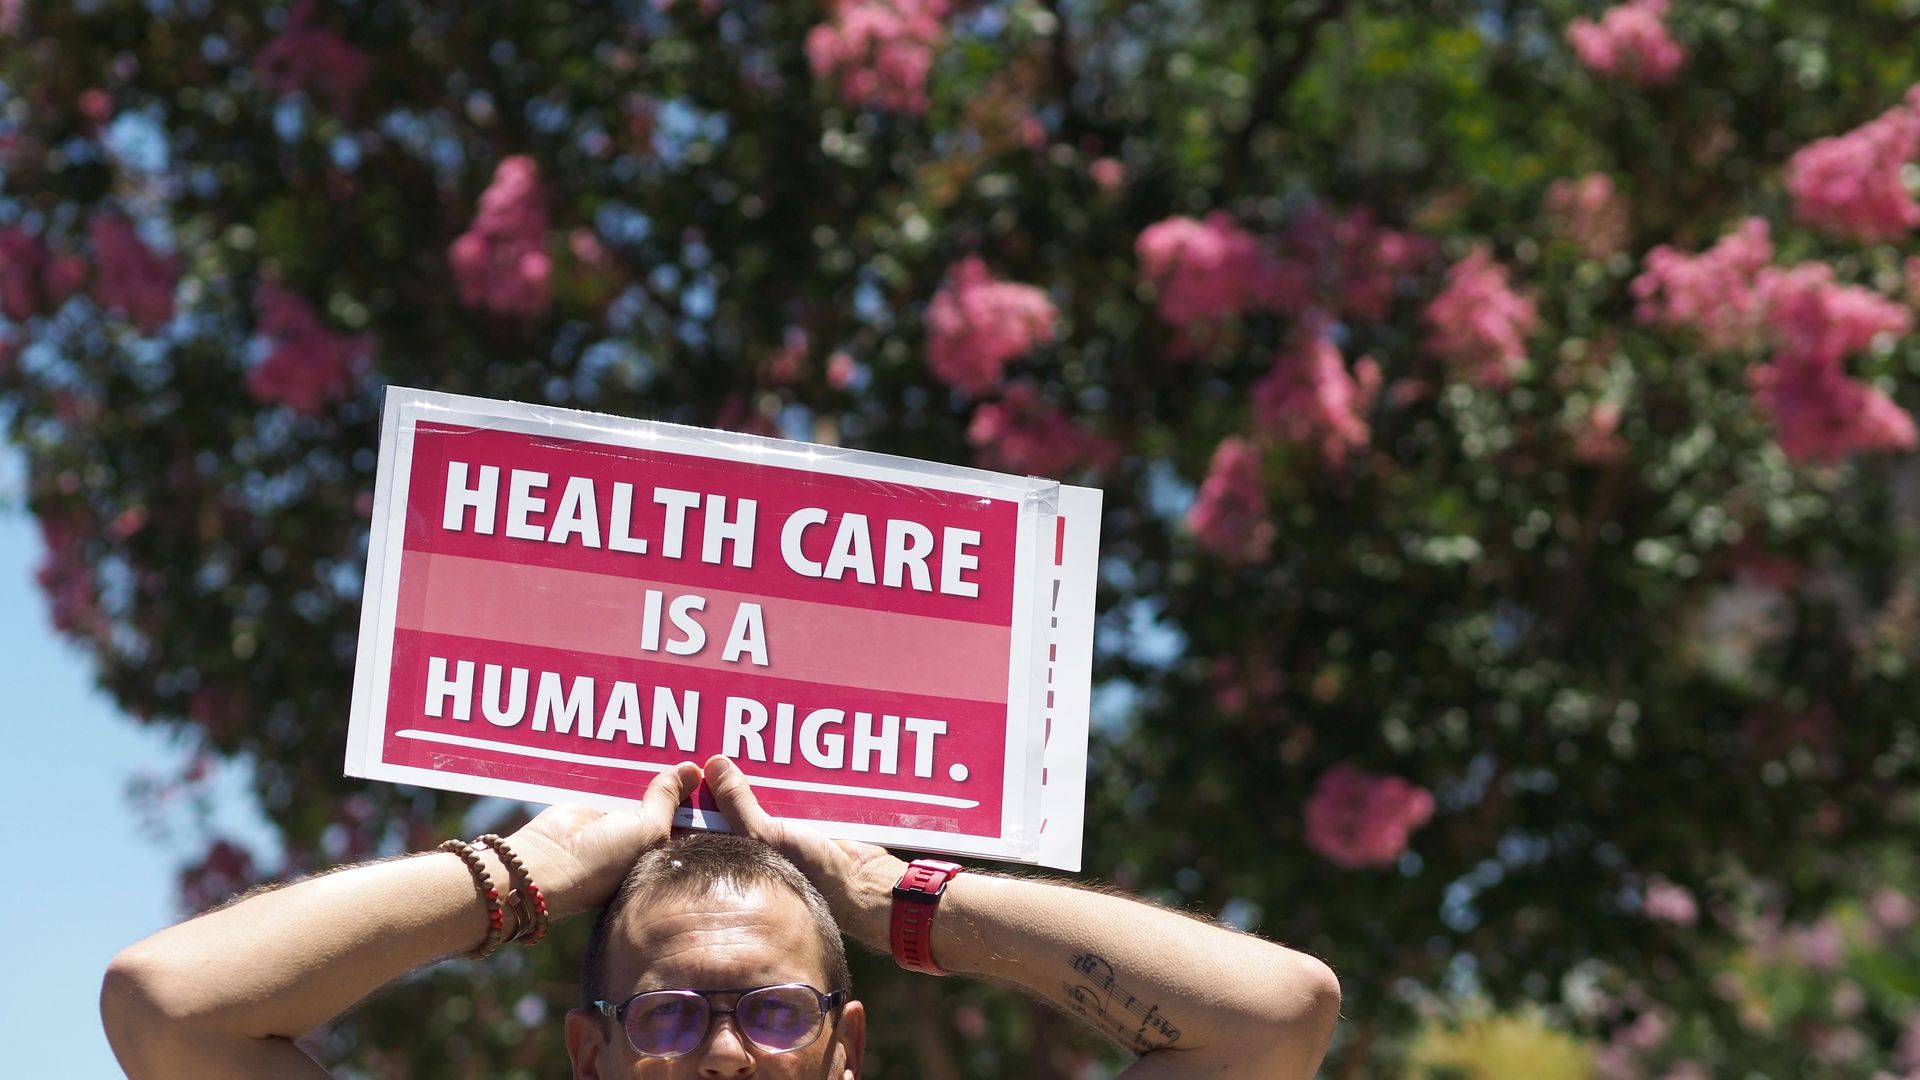 Picture of a person holding a sign that says "Health care is a human right"